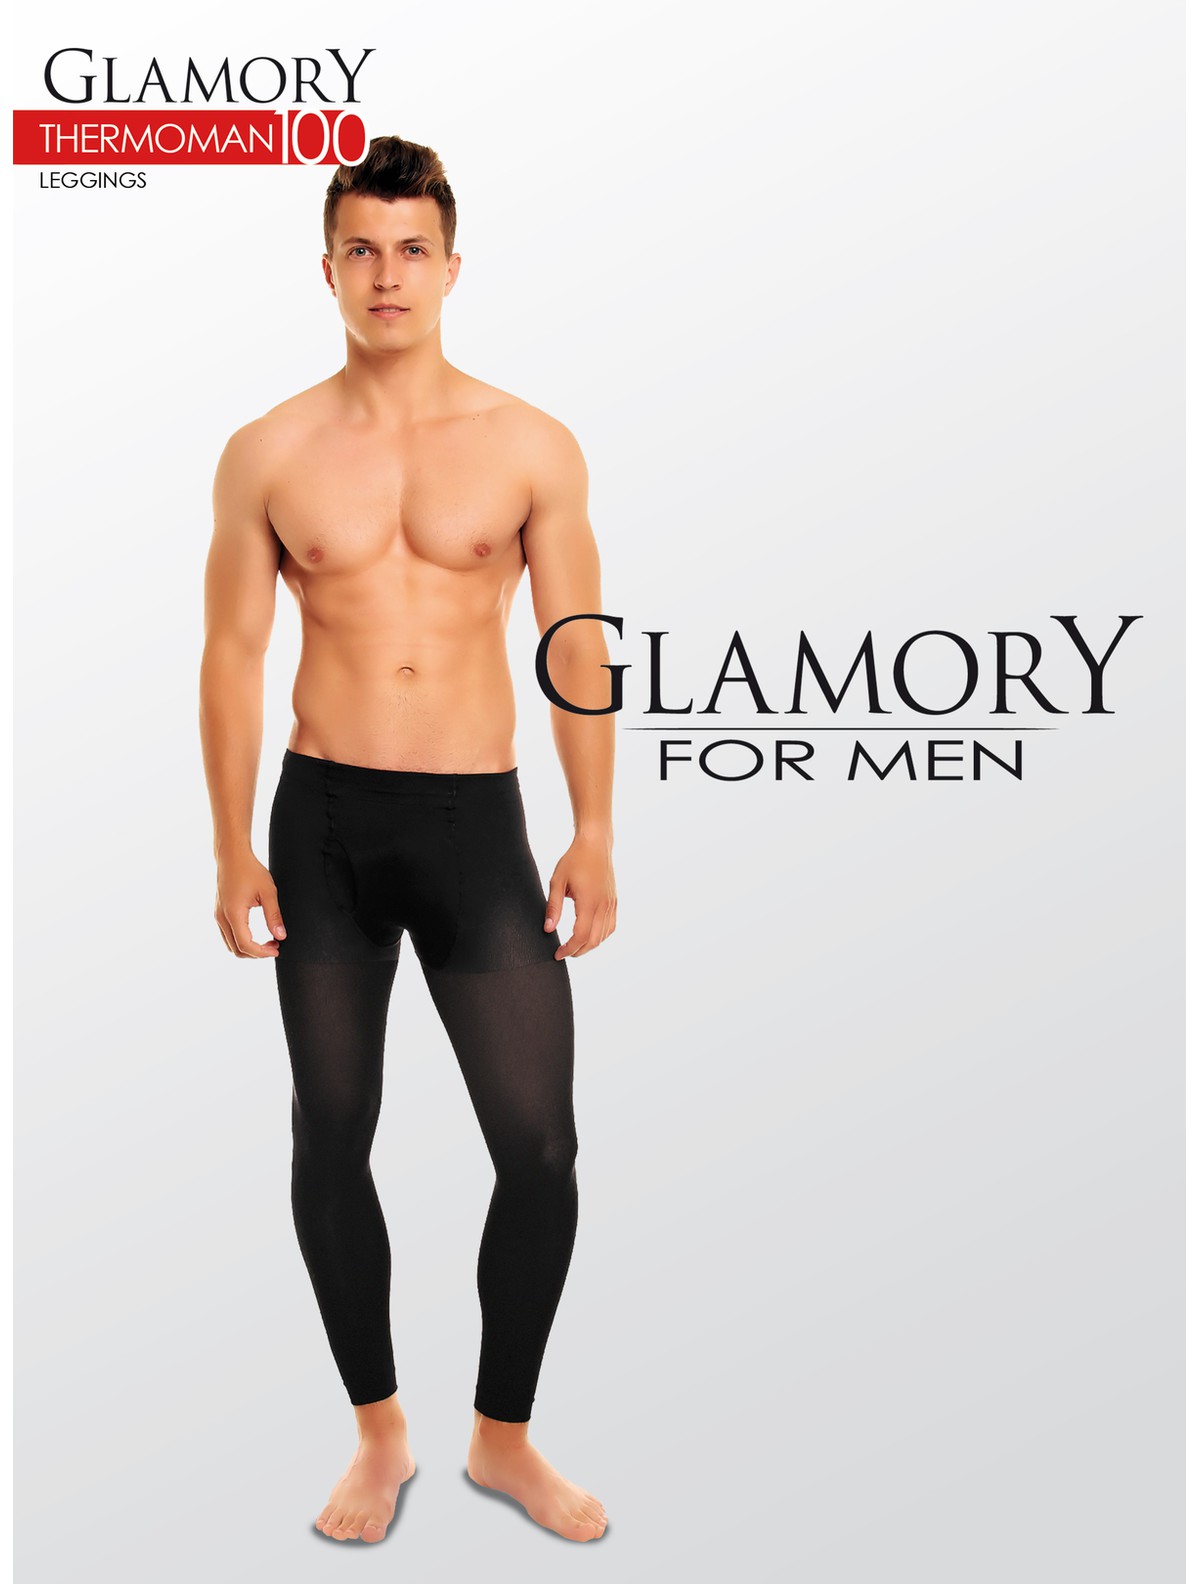 Glamory for Thermoman 100 Leggings